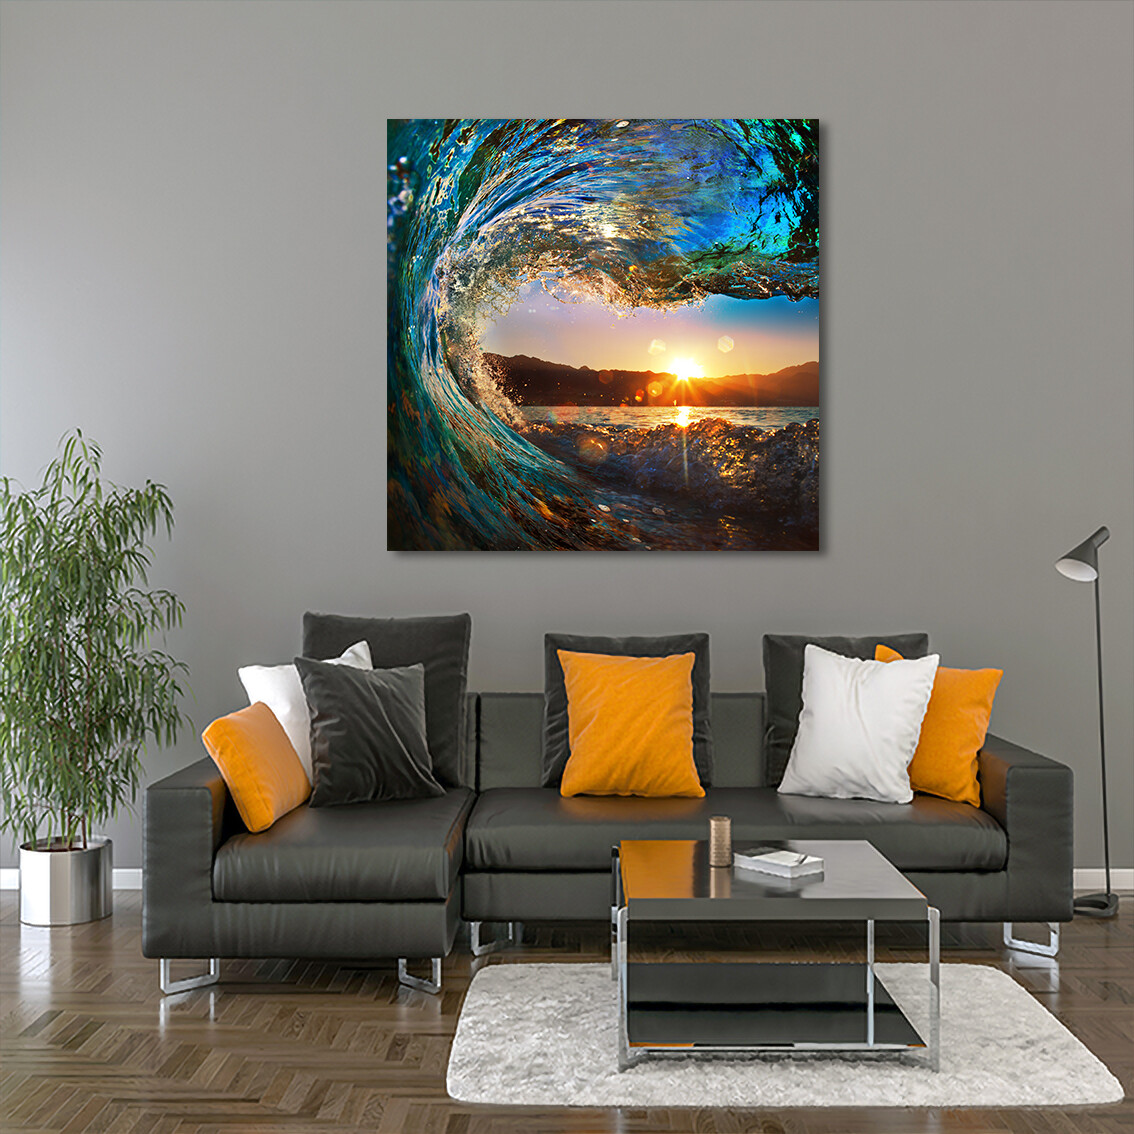 Ocean Wave - Modern Luxury Wall art Printed on Acrylic Glass - Frameless and Ready to Hang